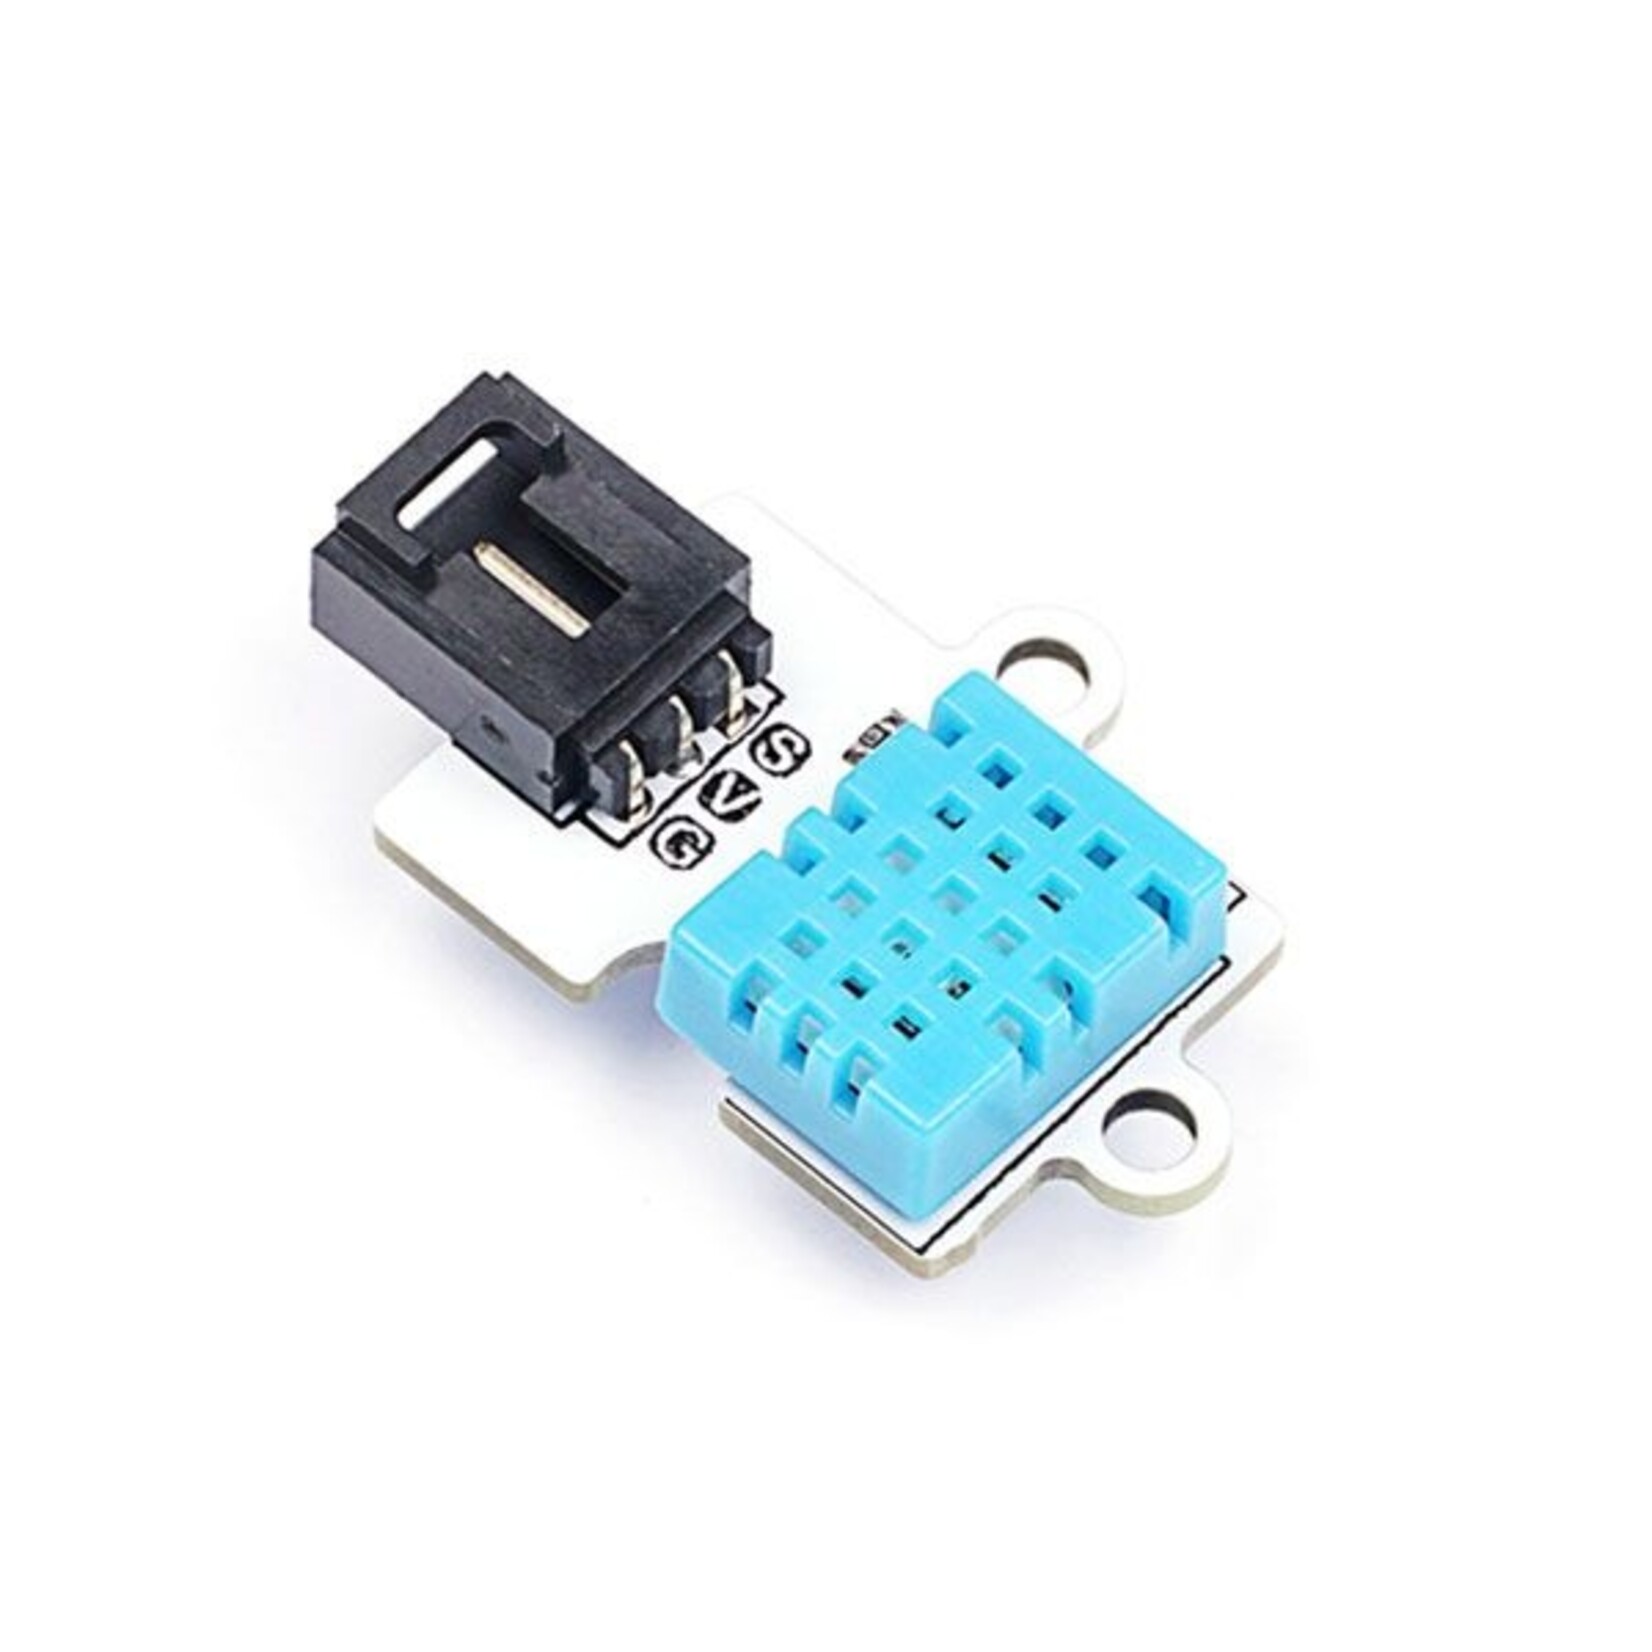 Elecfreaks Octopus DHT11 Temperature And Humidity Sensor